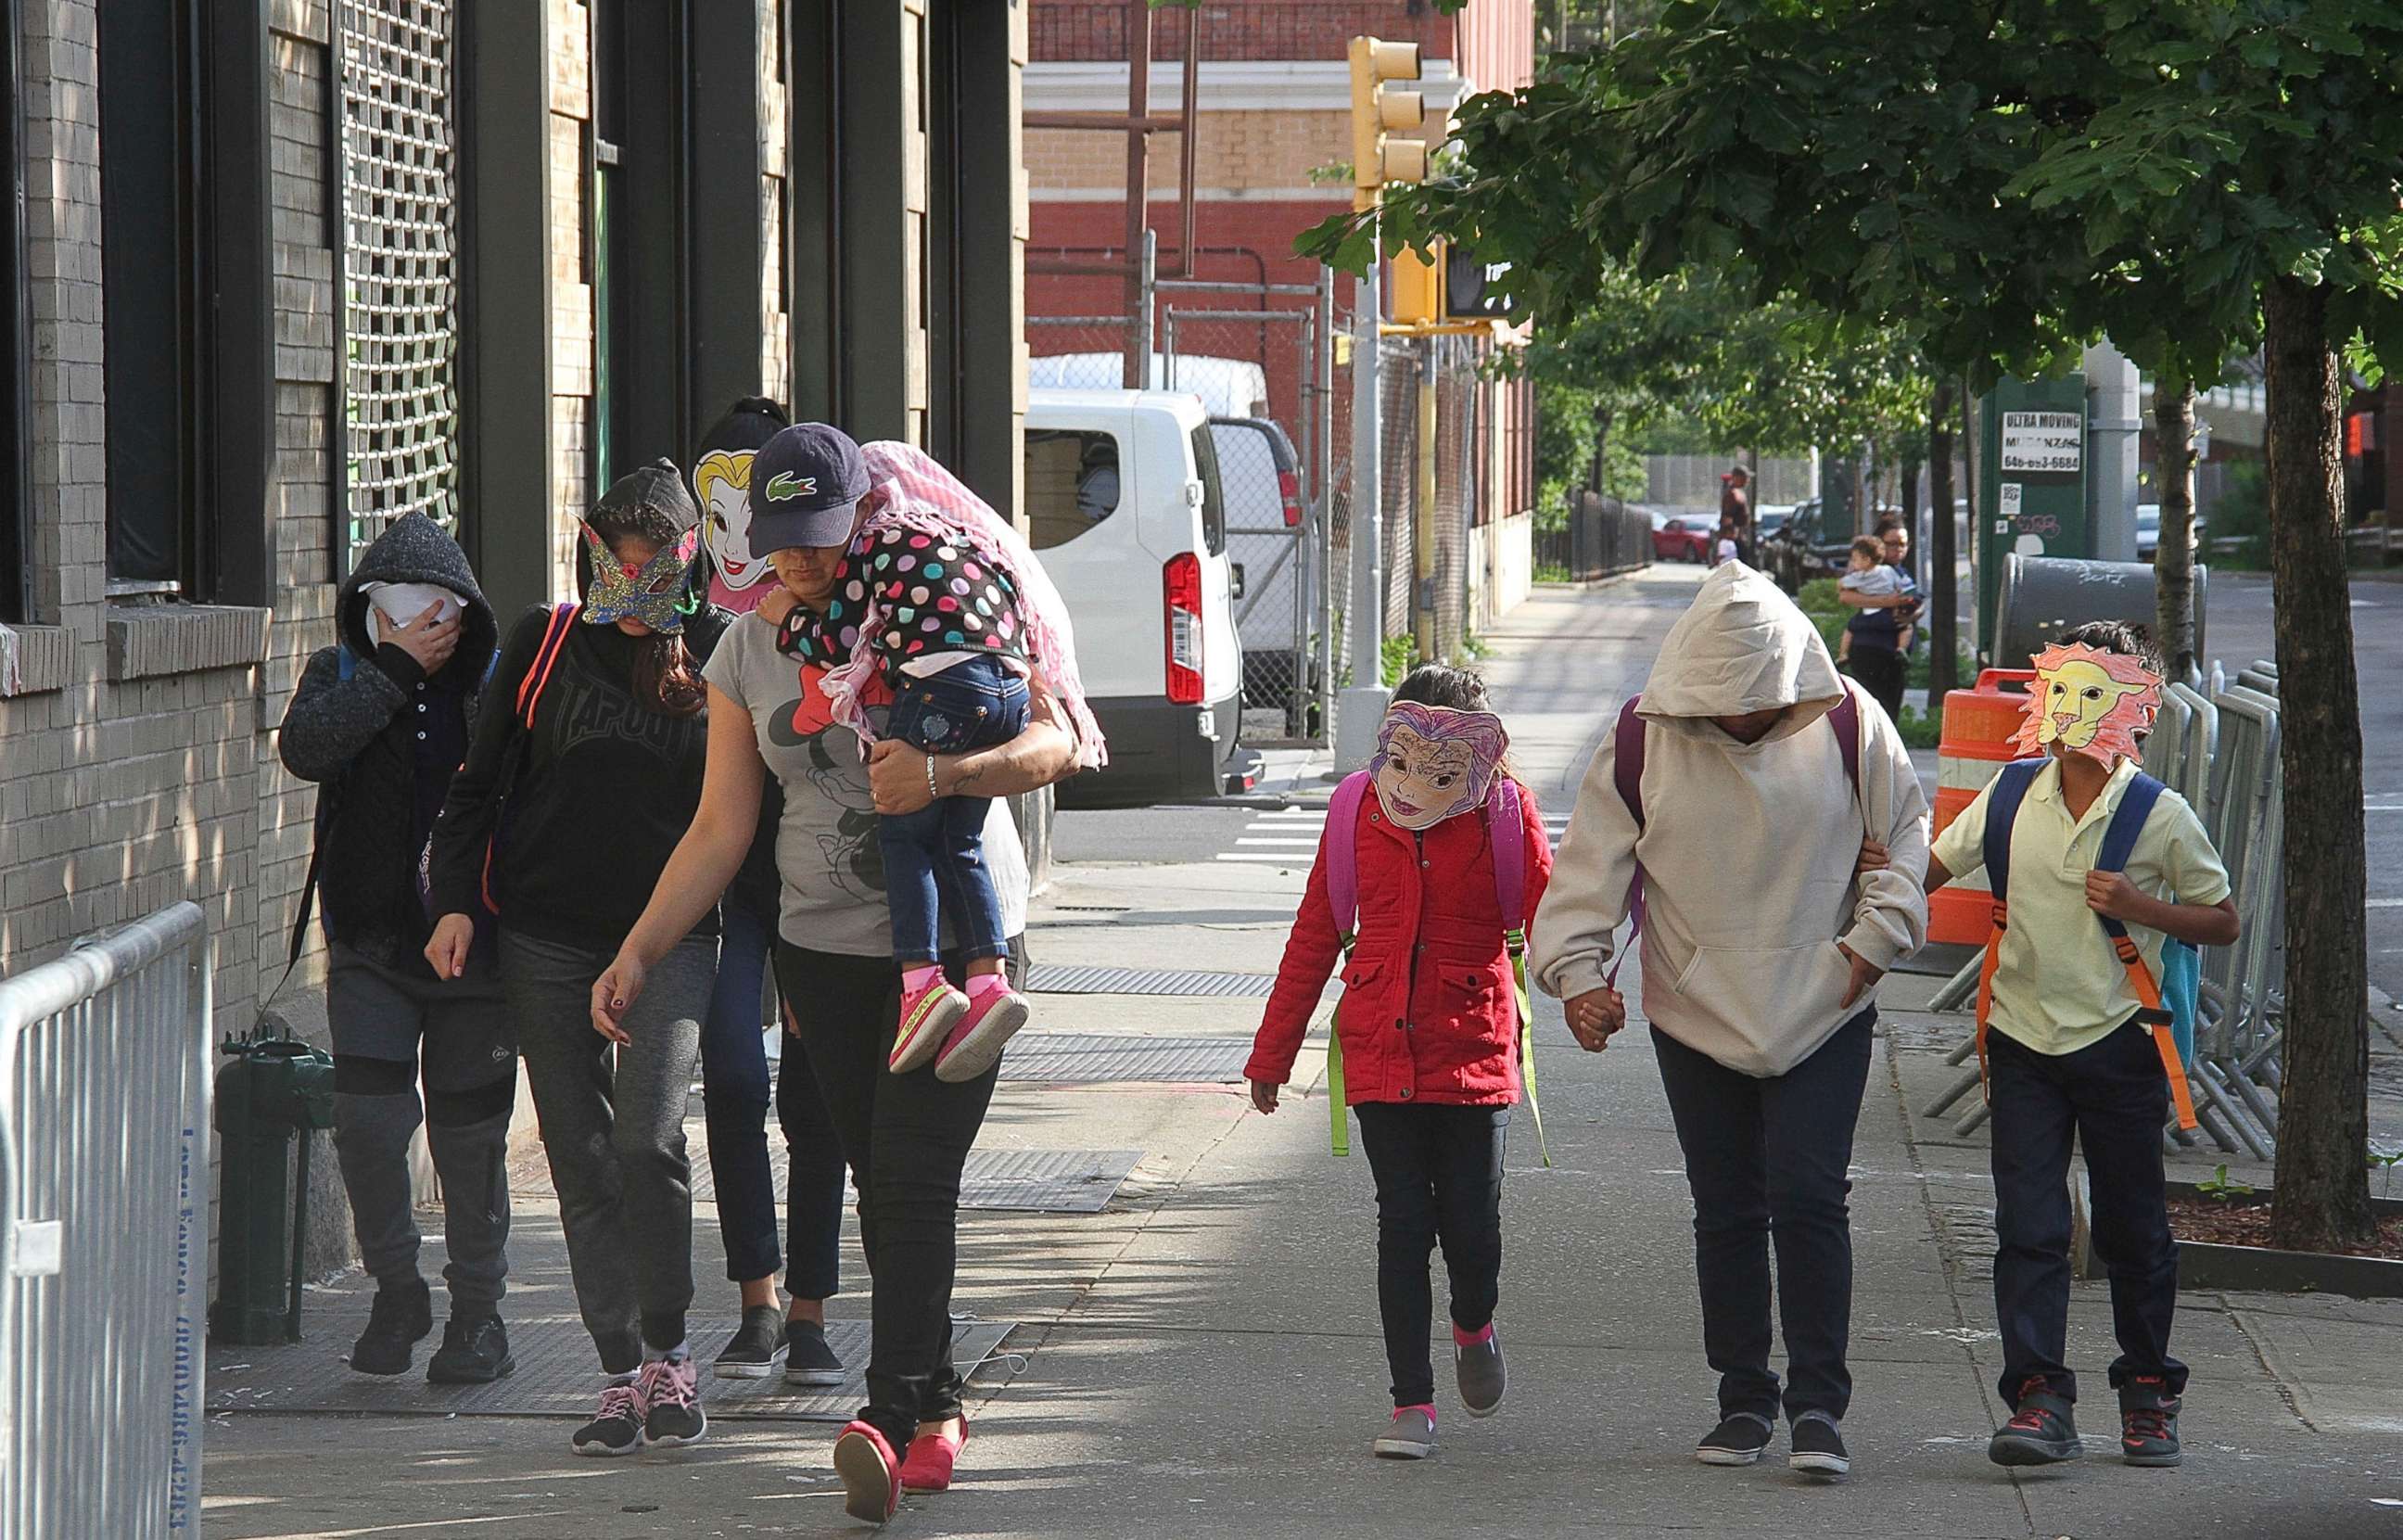 PHOTO: In this June 22, 2018, file photo, immigrant children separated from parents who were detained at the U.S./Mexico border arrive at the Cayuga Center, a foster care facility in New York.